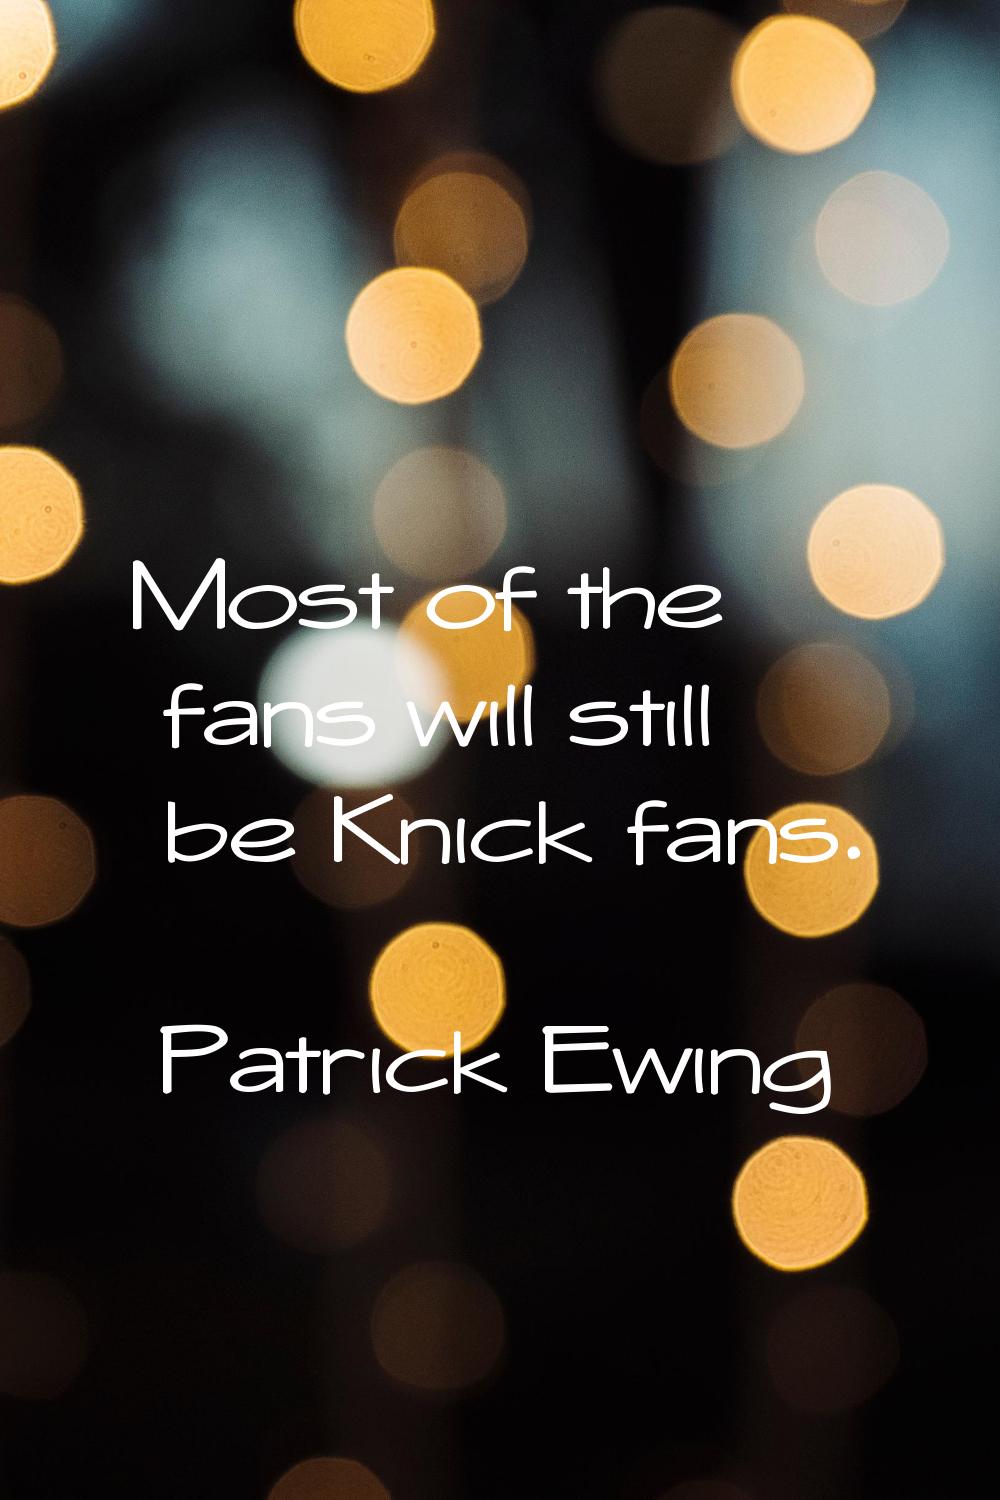 Most of the fans will still be Knick fans.